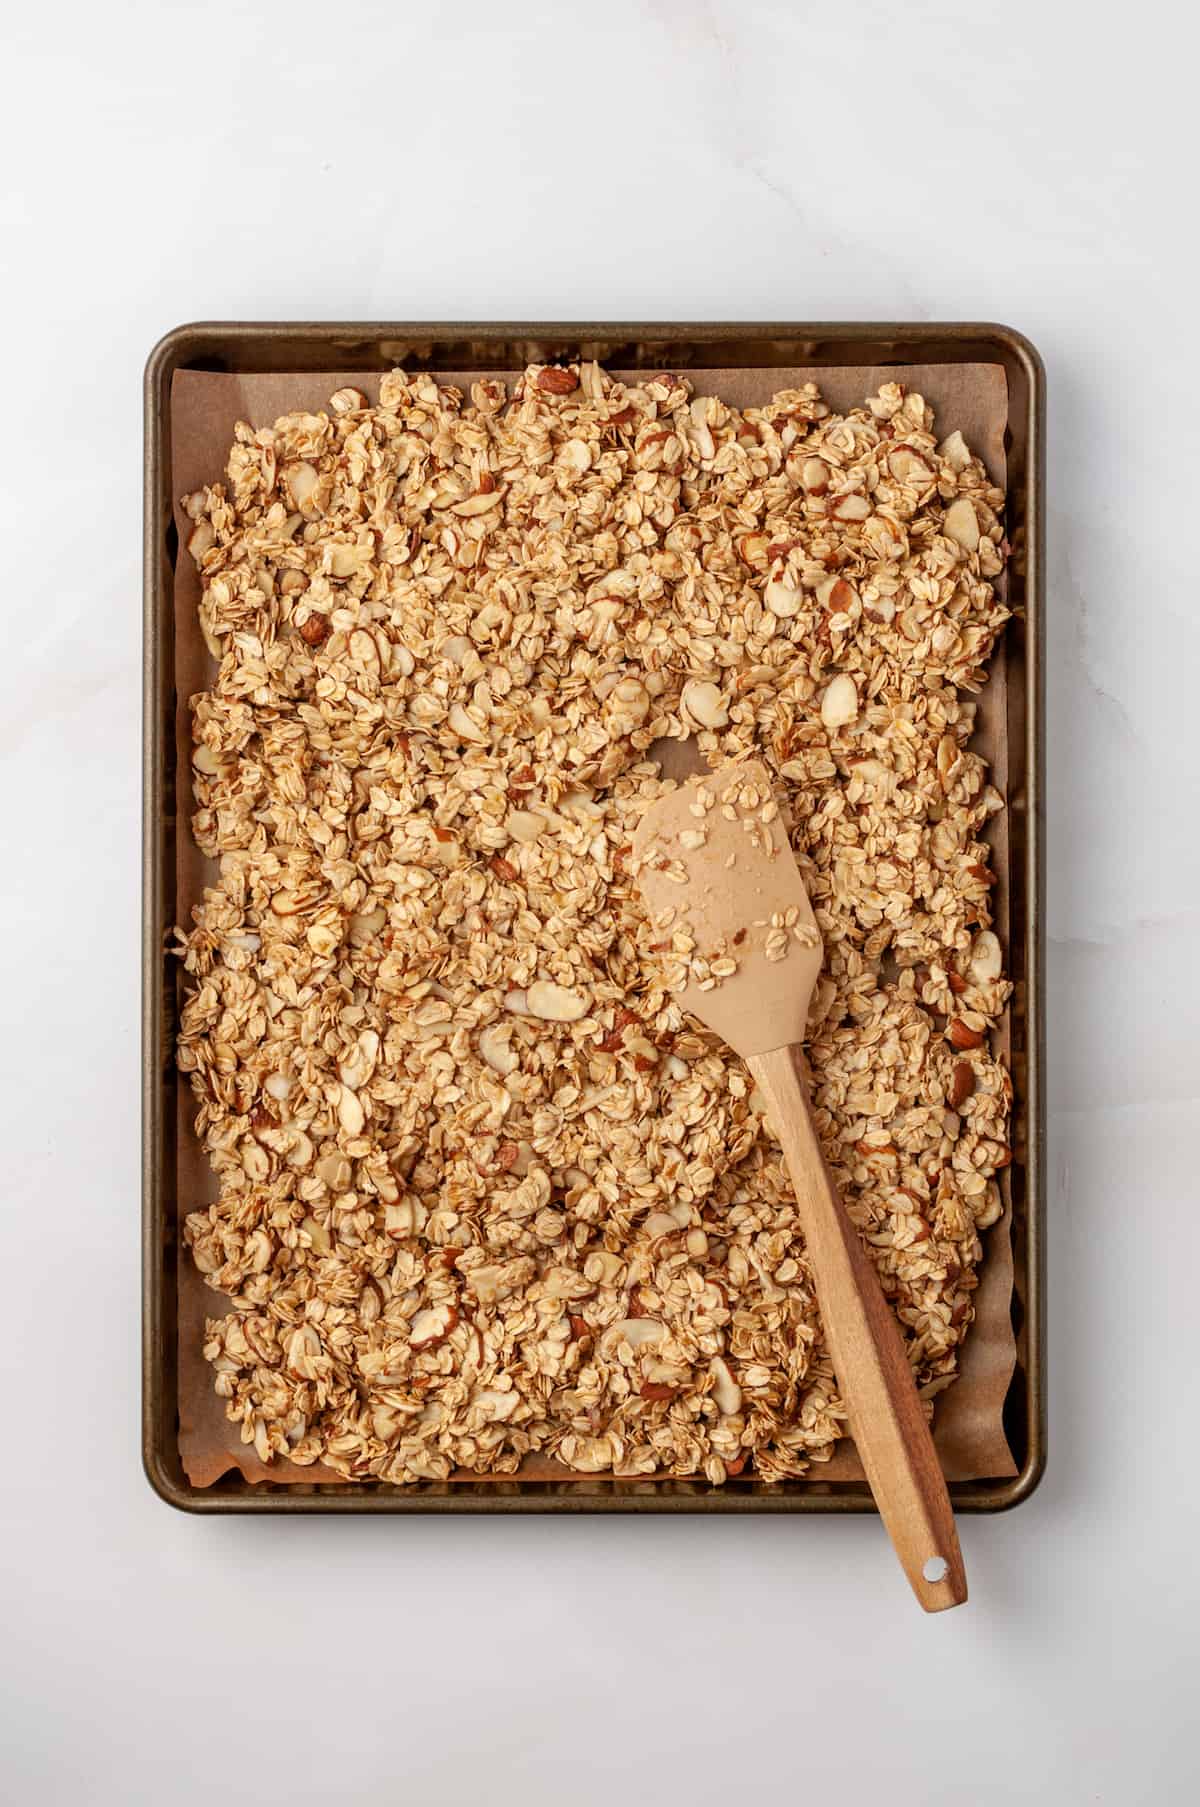 Overhead view of granola on sheet pan with wooden spatula